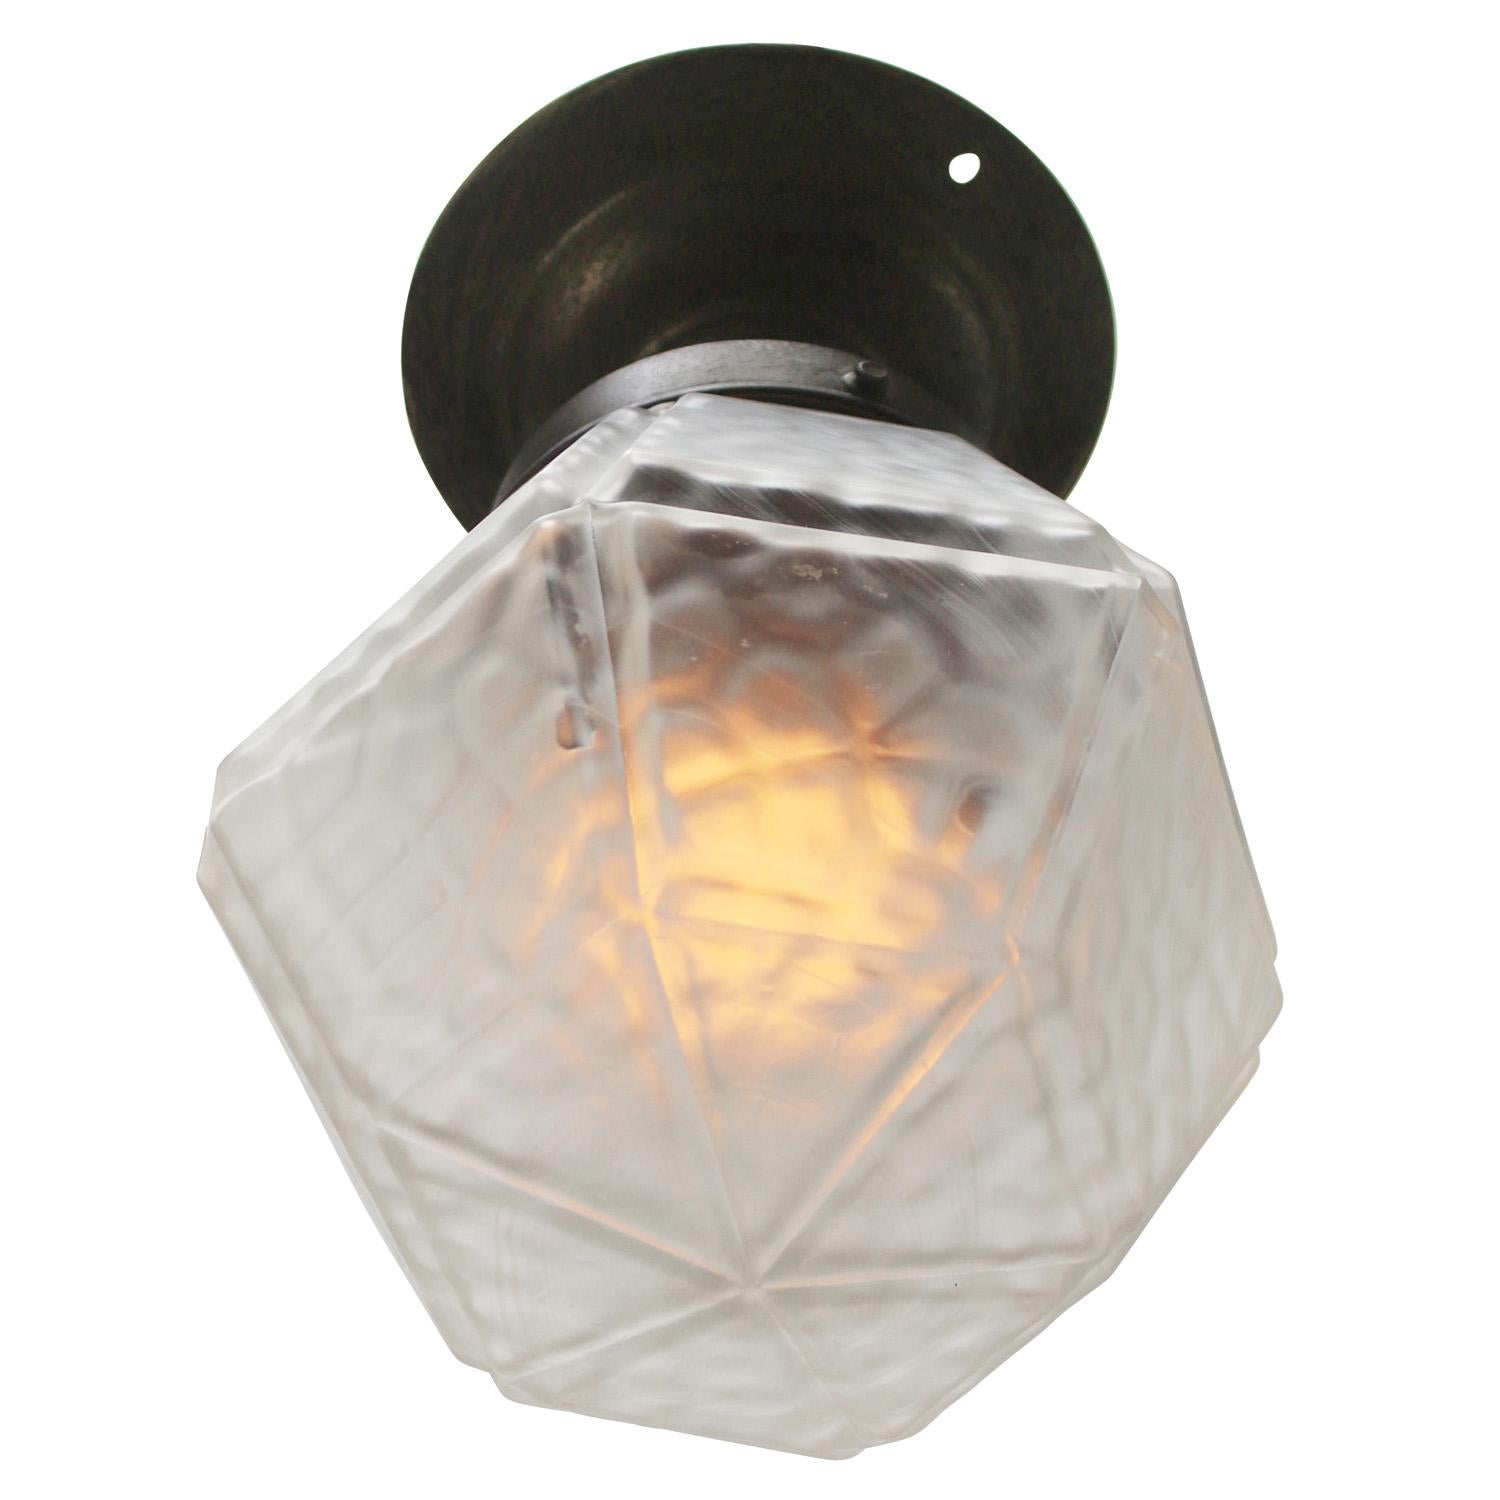 Art deco ceiling lamp.
Brass and frosted glass.

2 conductors, no ground.
Diameter foot 12 cm / 4.7”

Weight: 0.70 kg / 1.5 lb

Priced per individual item. All lamps have been made suitable by international standards for incandescent light bulbs,